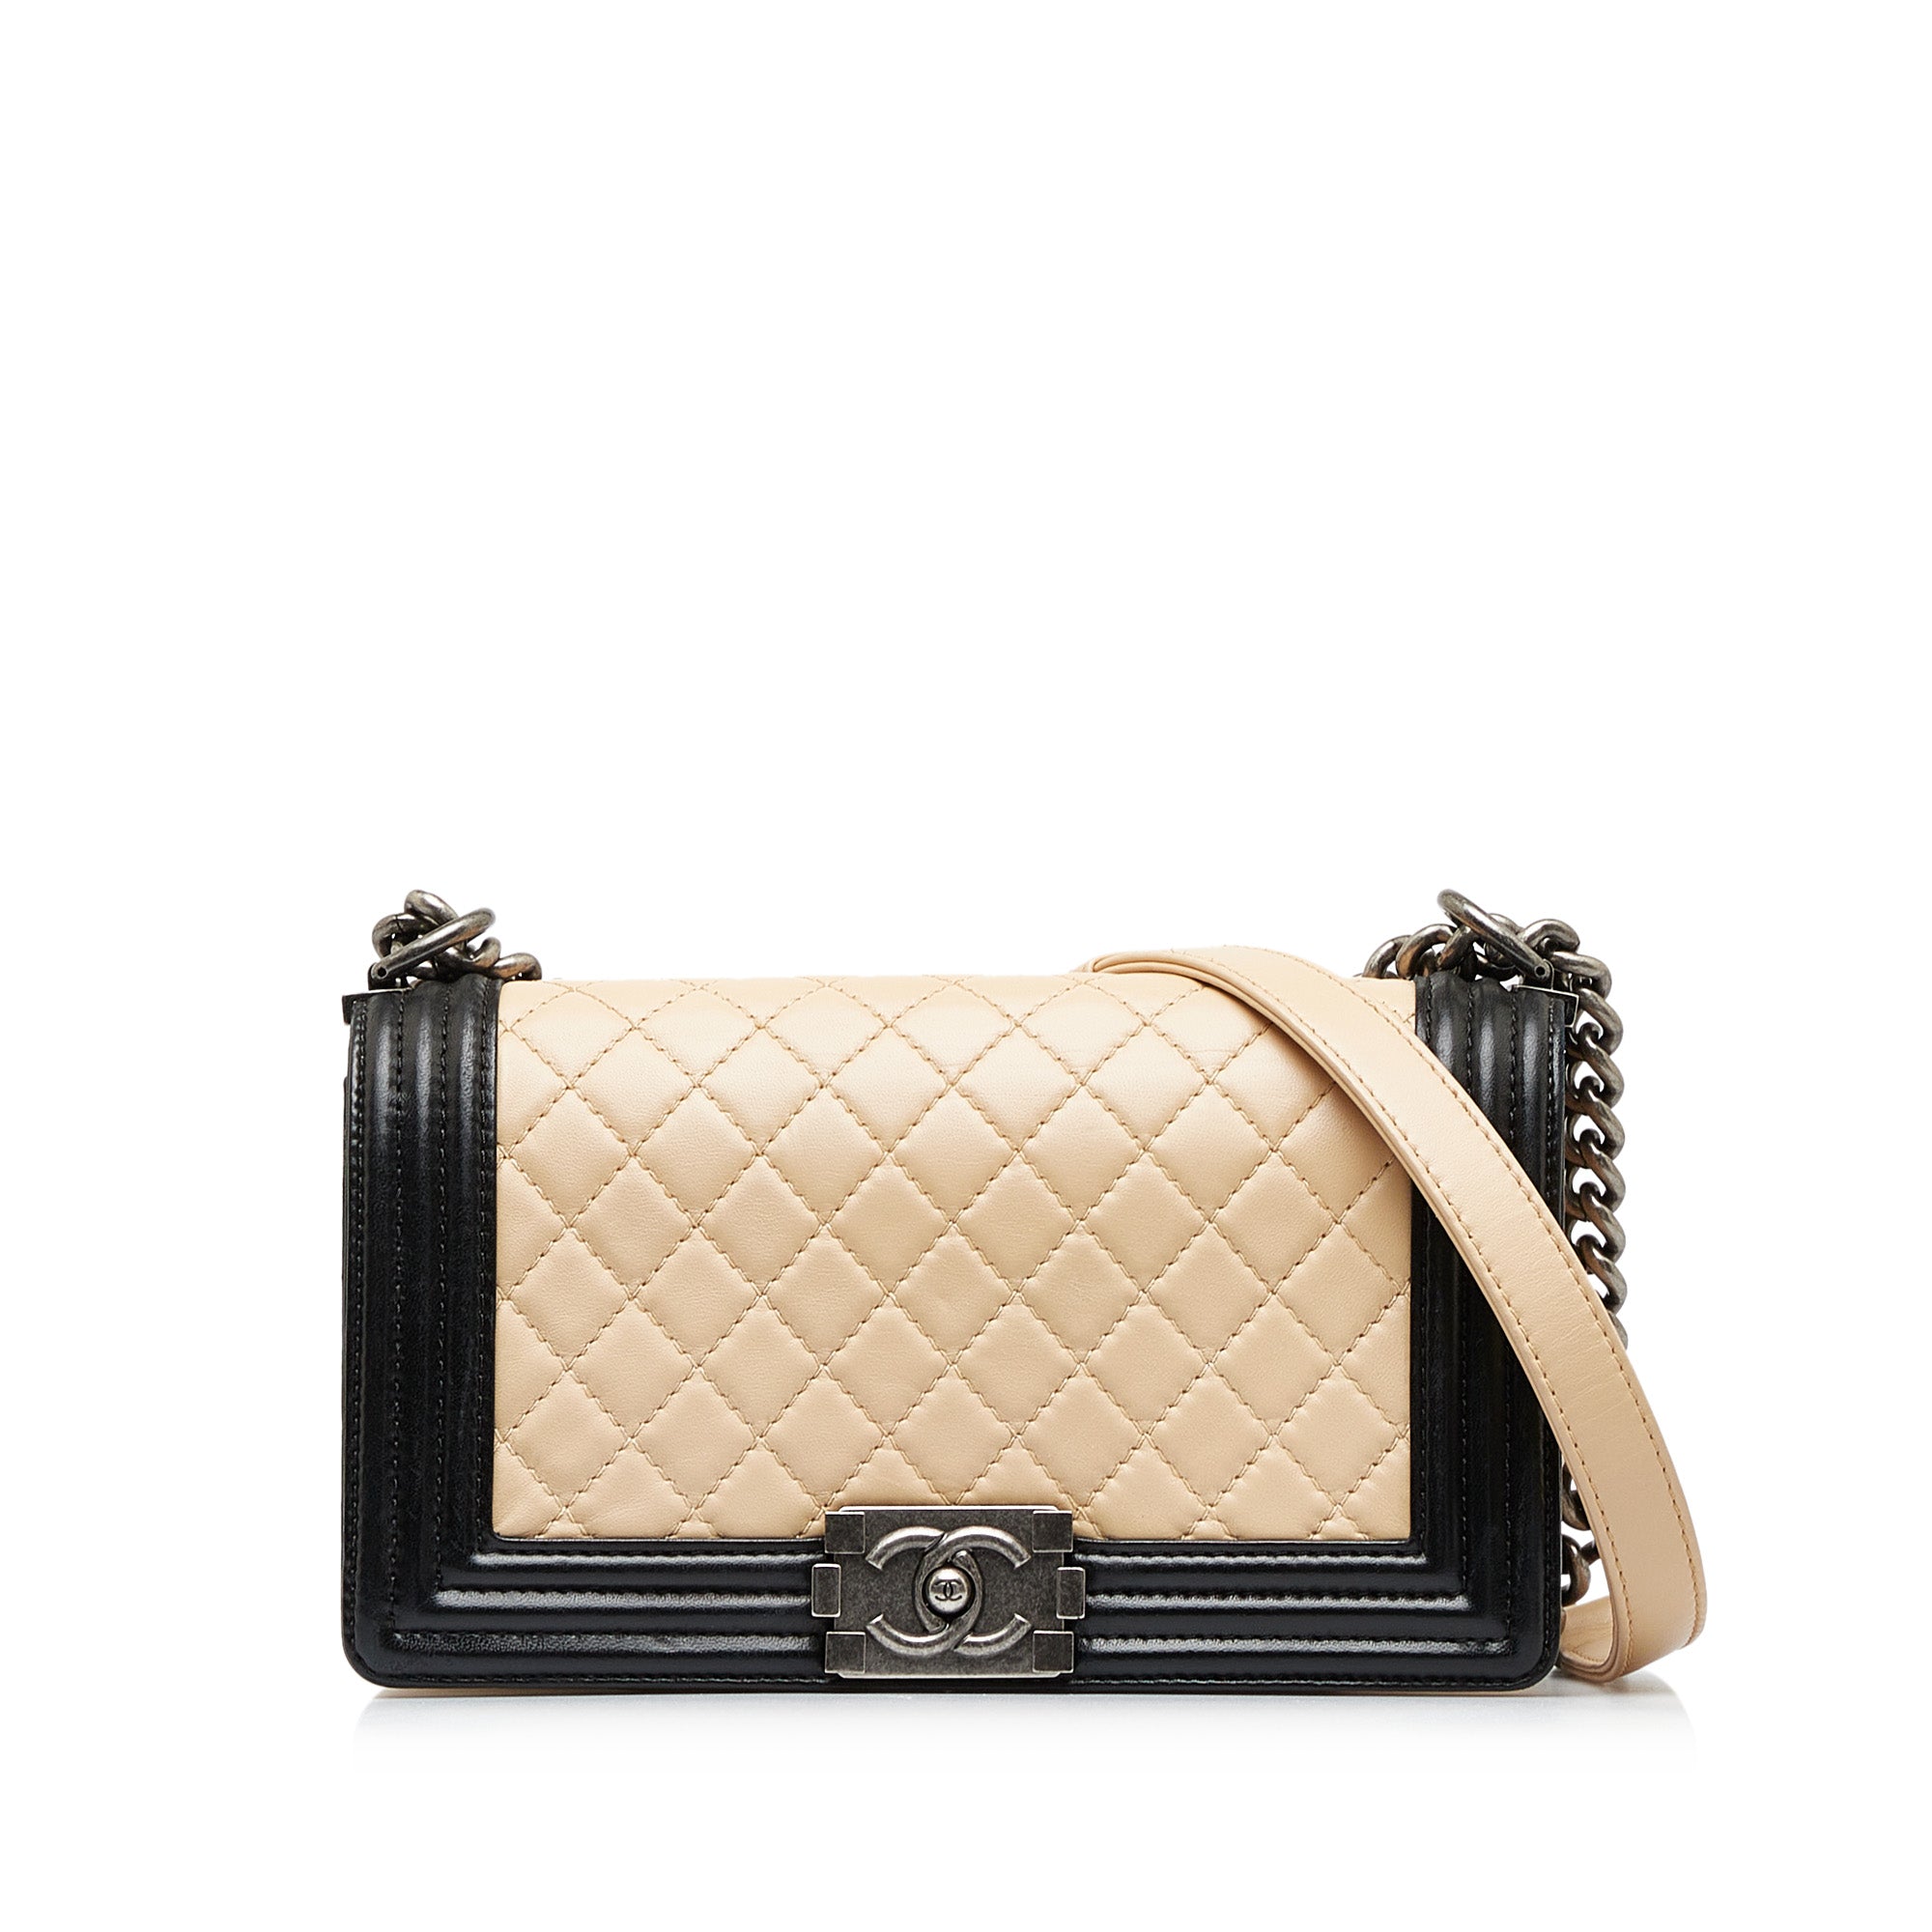 Chanel Large Flap Bag With Bi-Color Top Handle